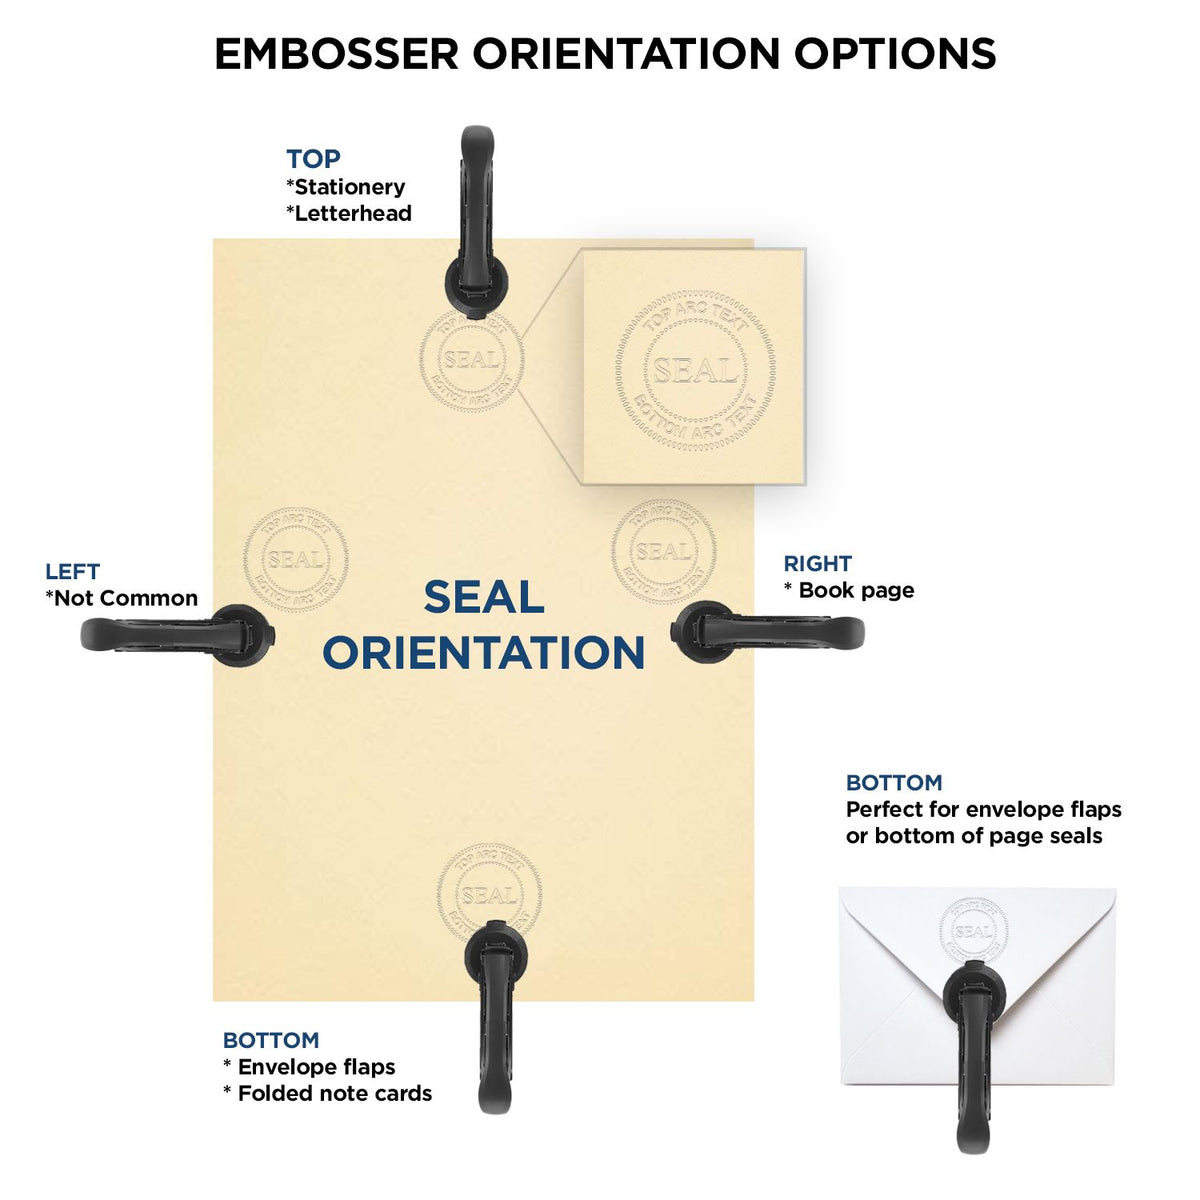 An infographic for the Heavy Duty Cast Iron Virginia Architect Embosser showing embosser orientation, this is showing examples of a top, bottom, right and left insert.